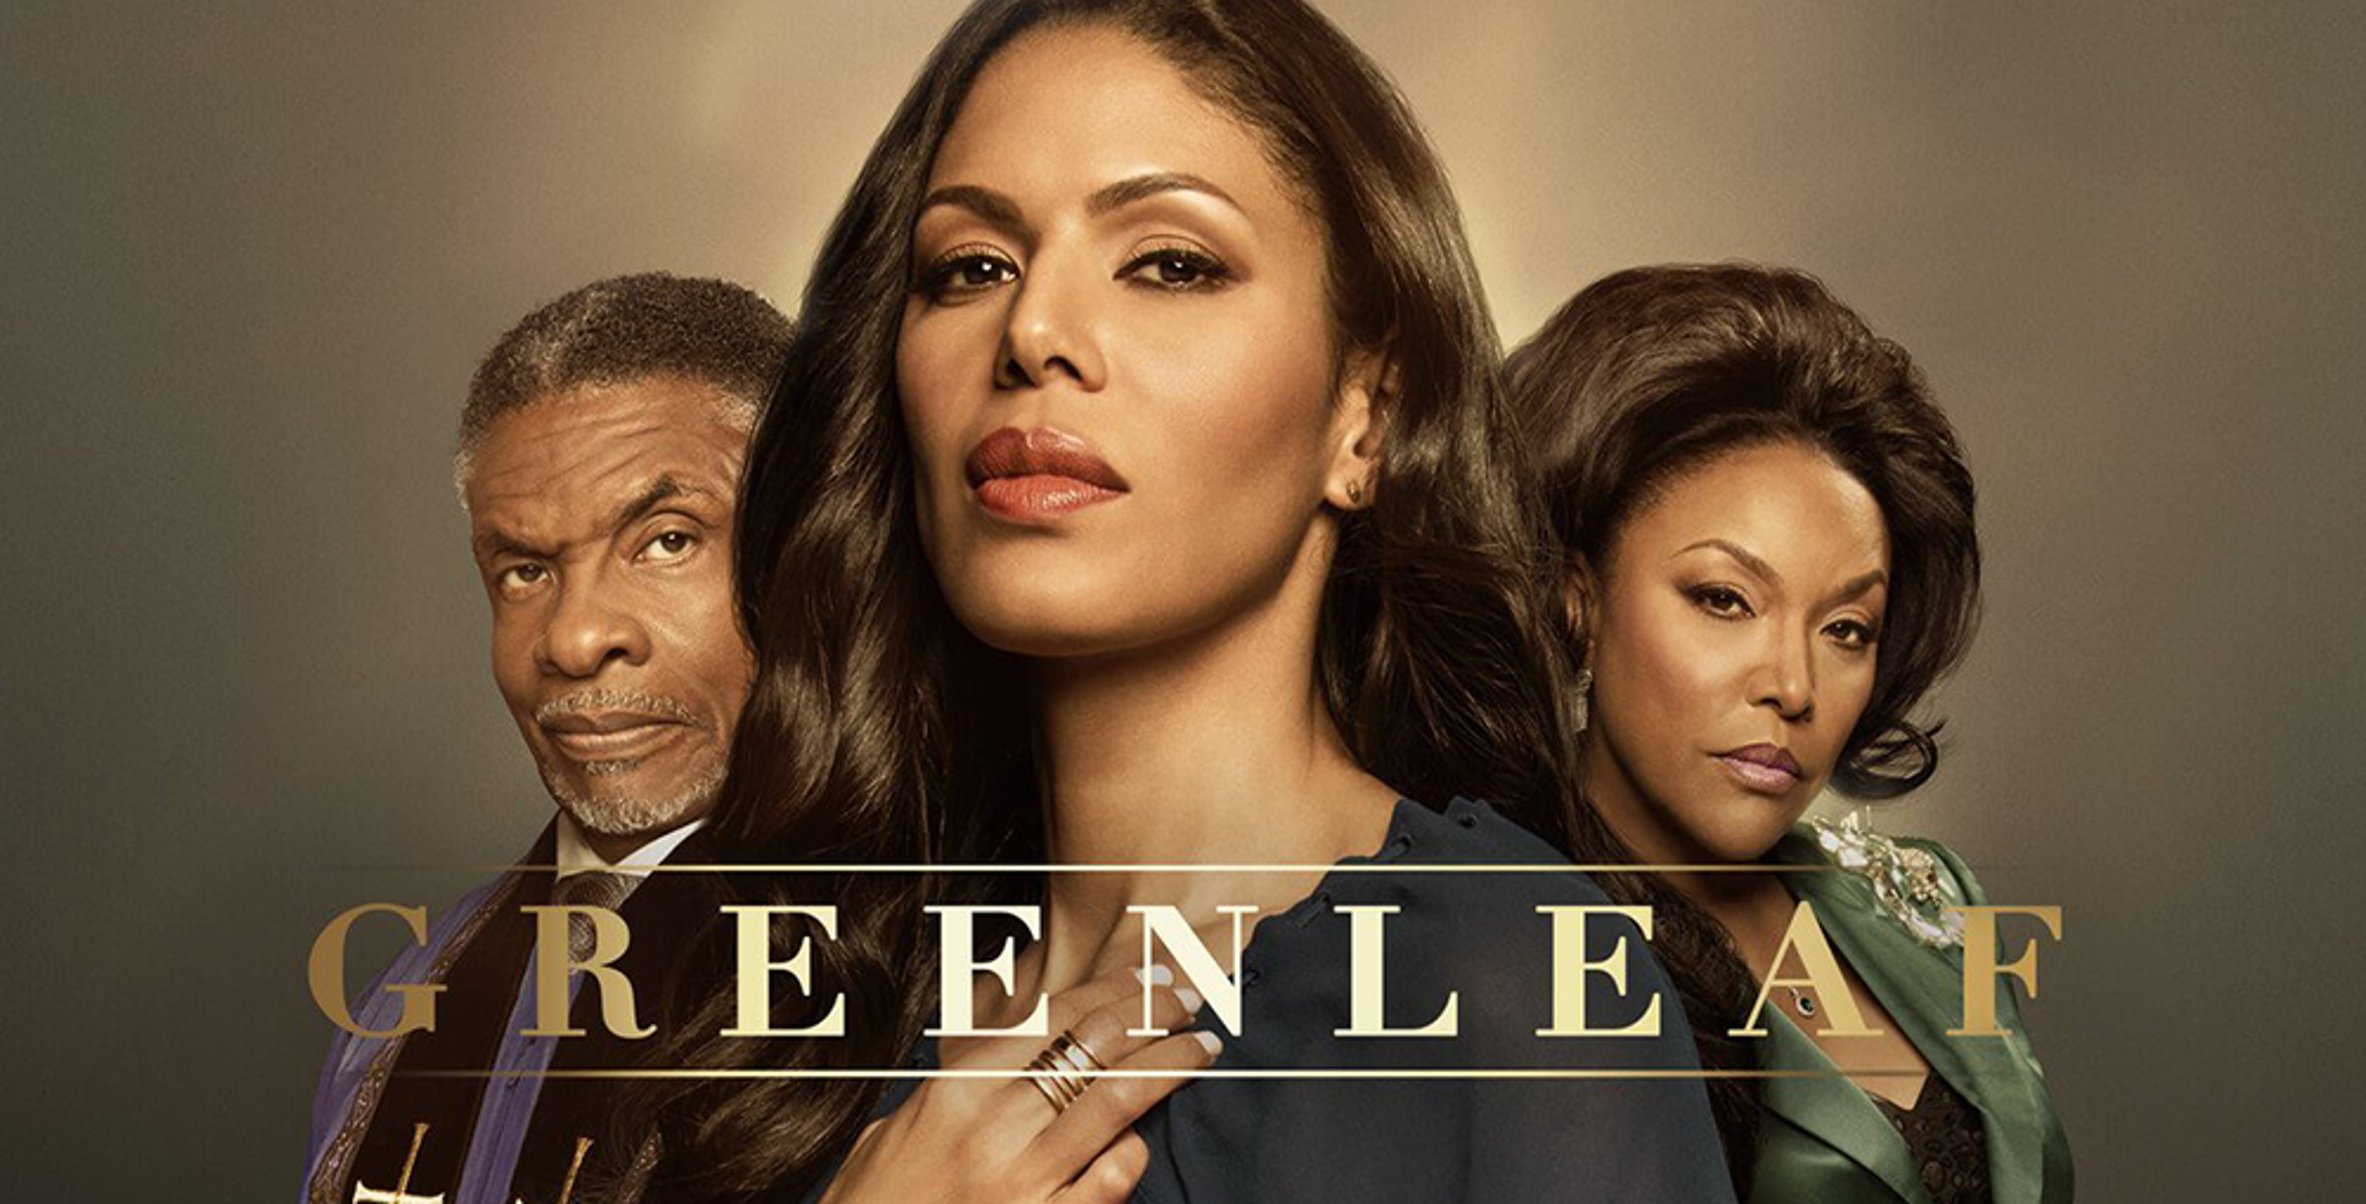 Greenleaf Season 4 Is Casting Talent For A Party Scene